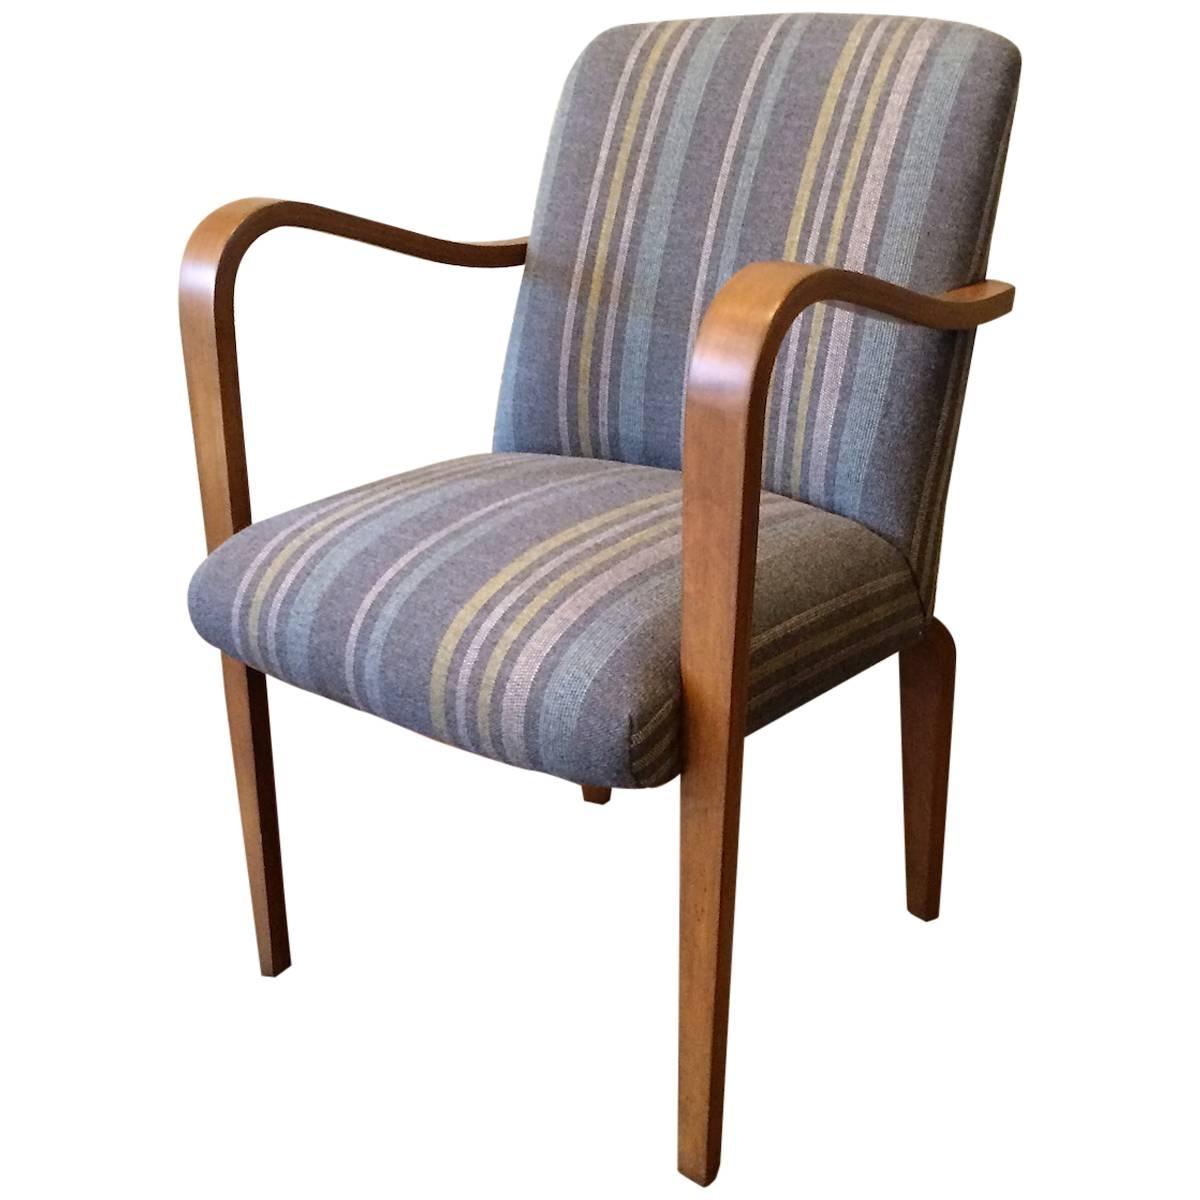 Upholstered Bentwood Maple Armchair by Thonet